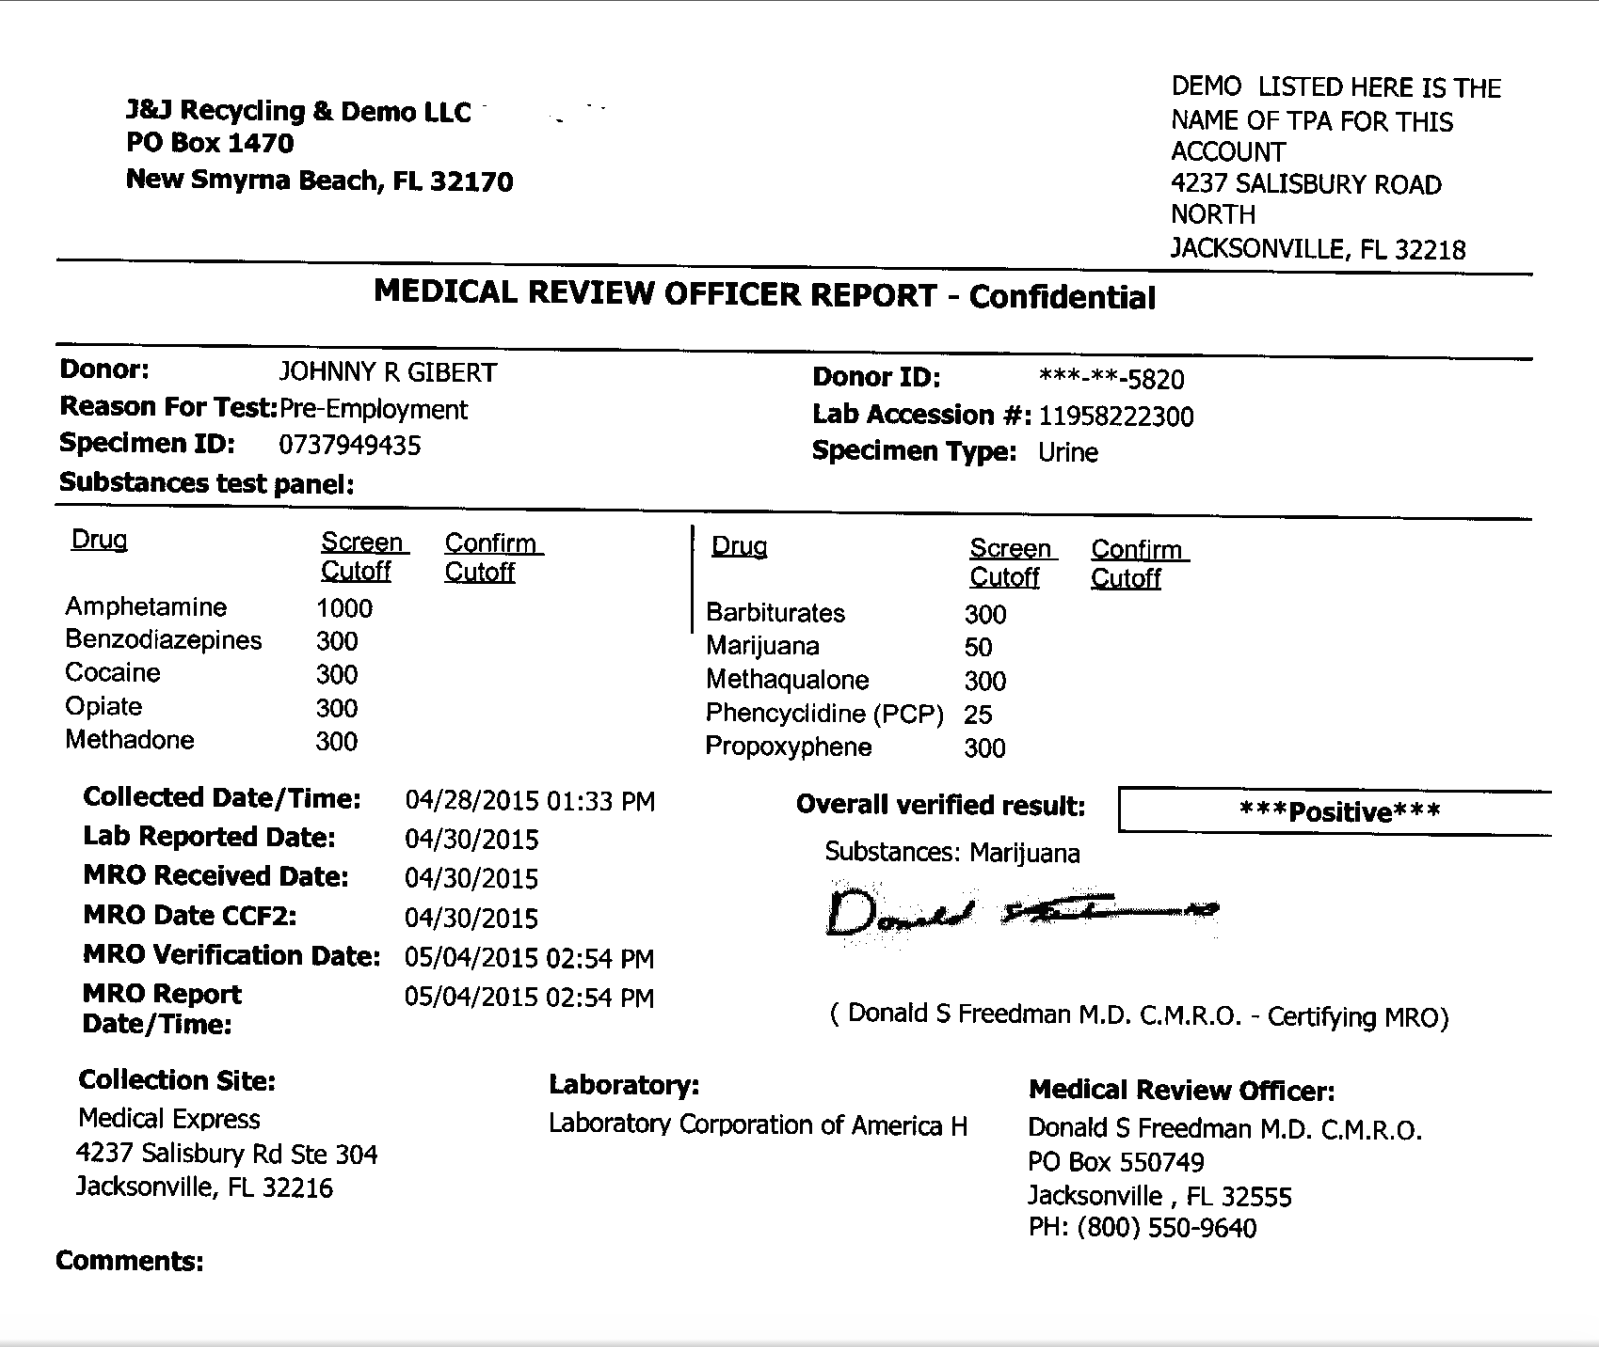 Drug Testing Result Examples from American Medical Review Officer